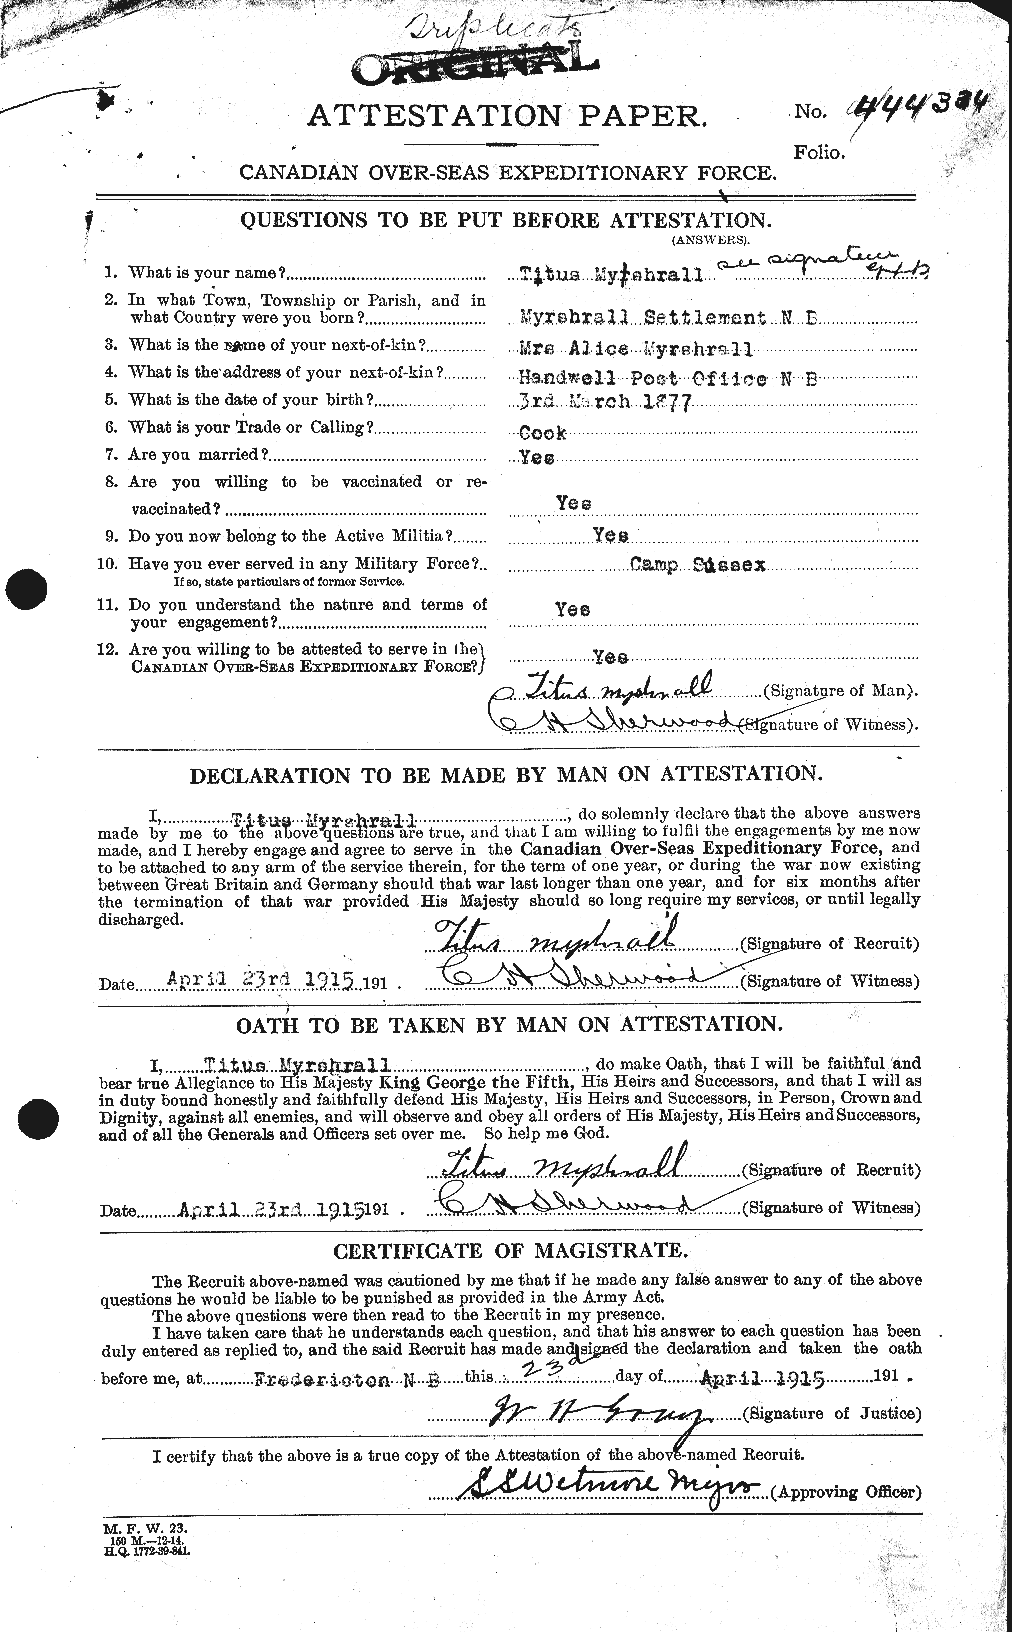 Personnel Records of the First World War - CEF 518055a